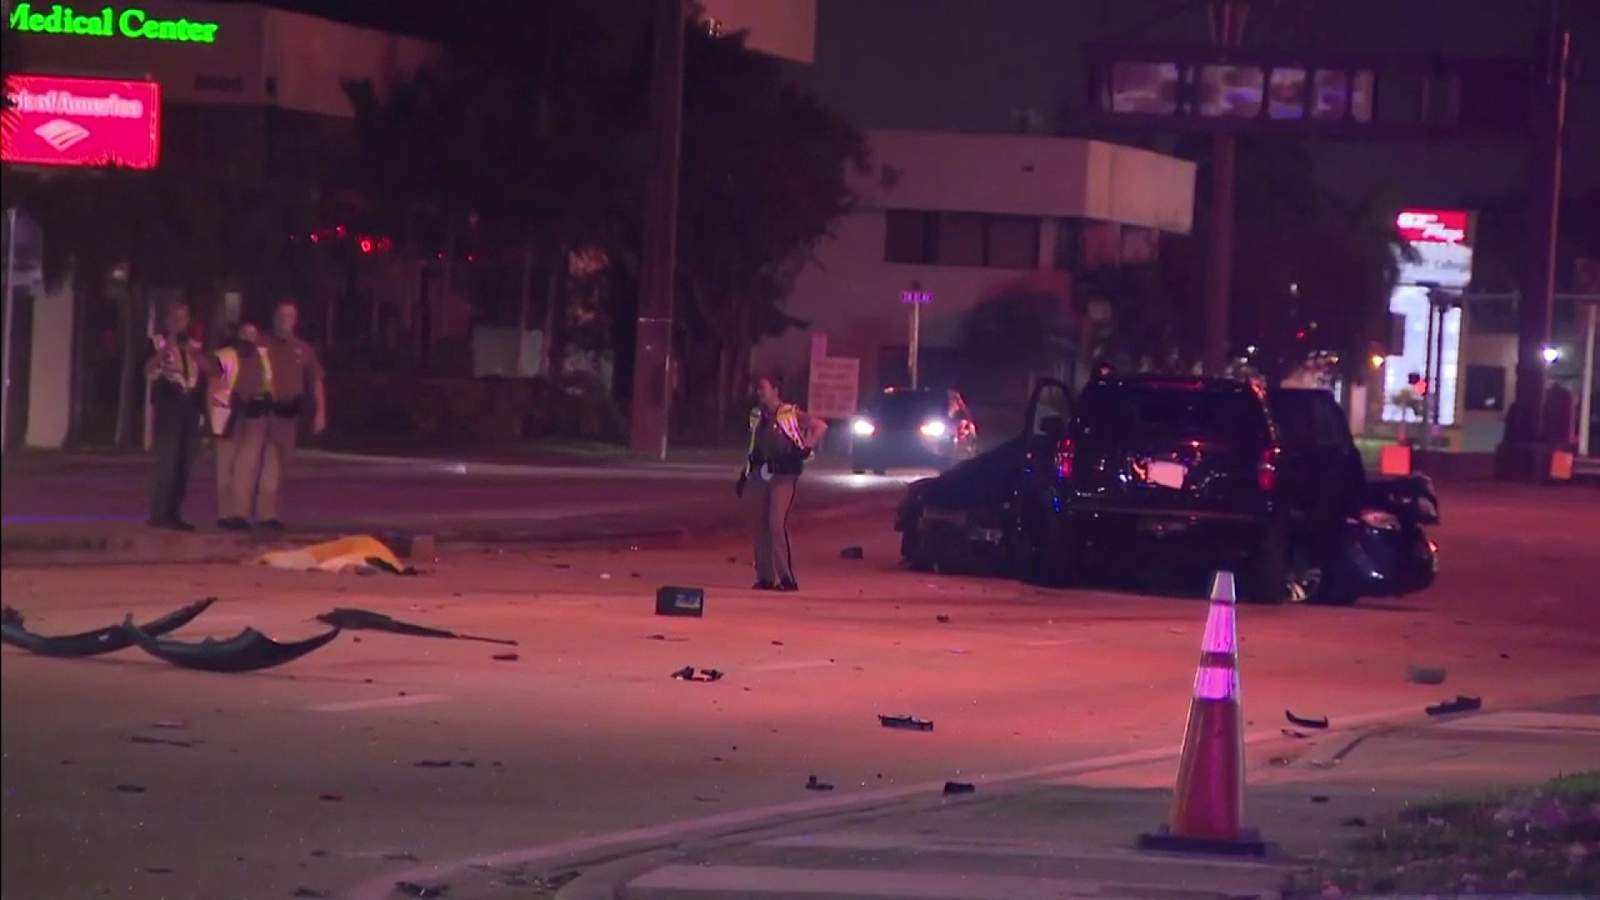 4 killed, 3 injured In New Year’s Day crash in West Miami-Dade